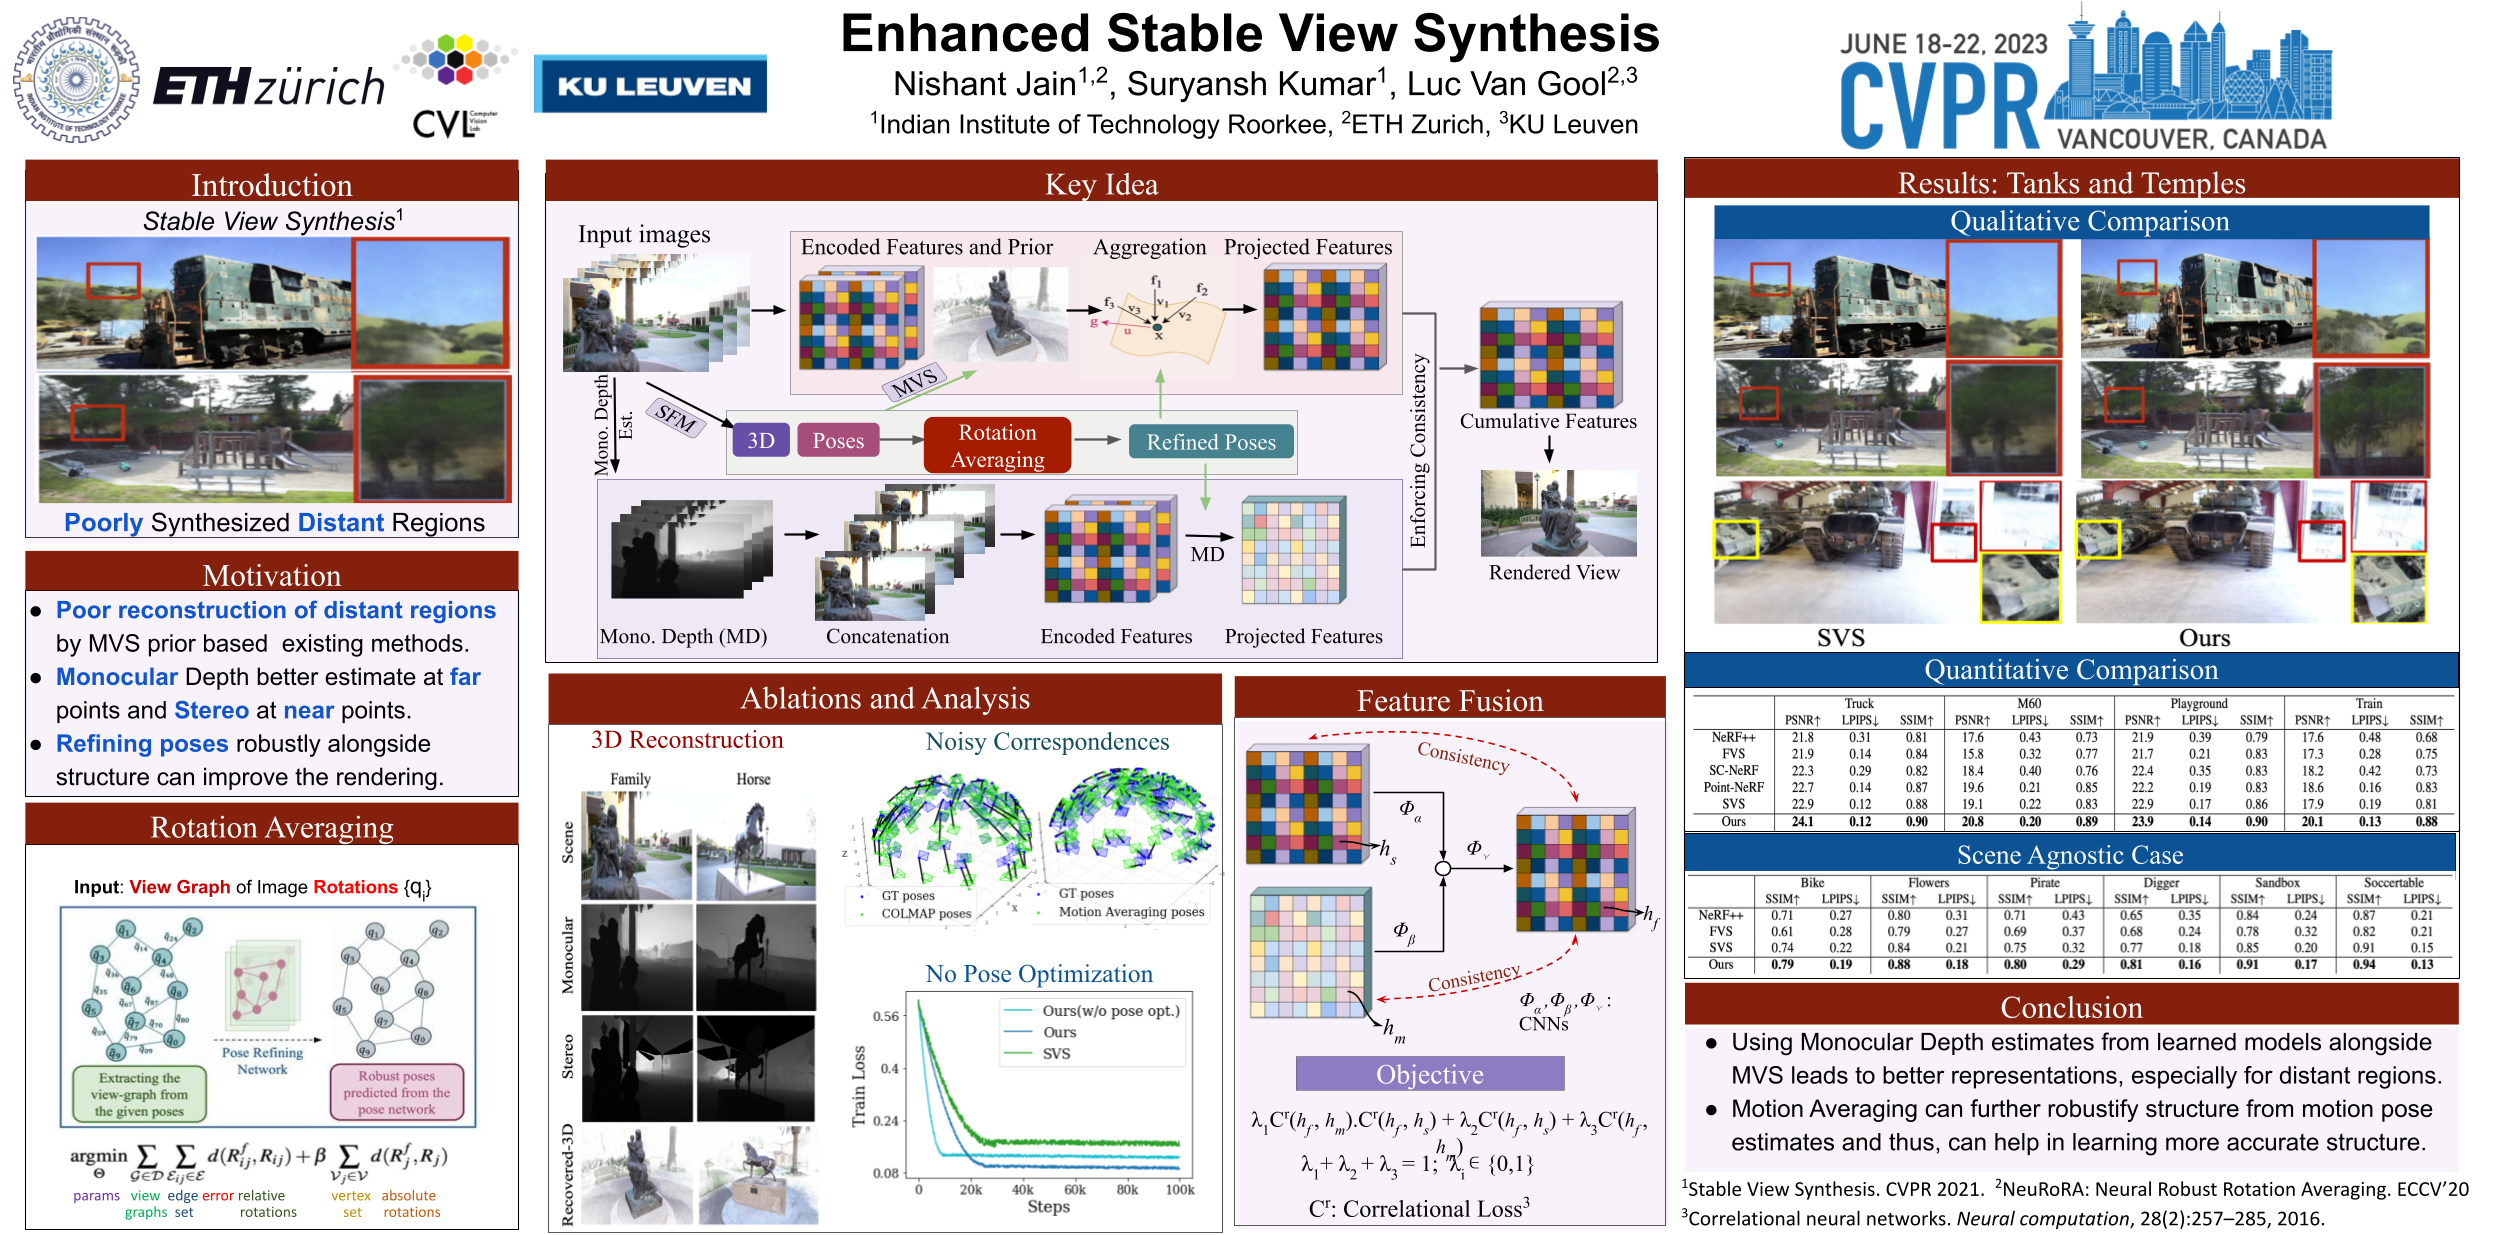 CVPR Poster Enhanced Stable View Synthesis